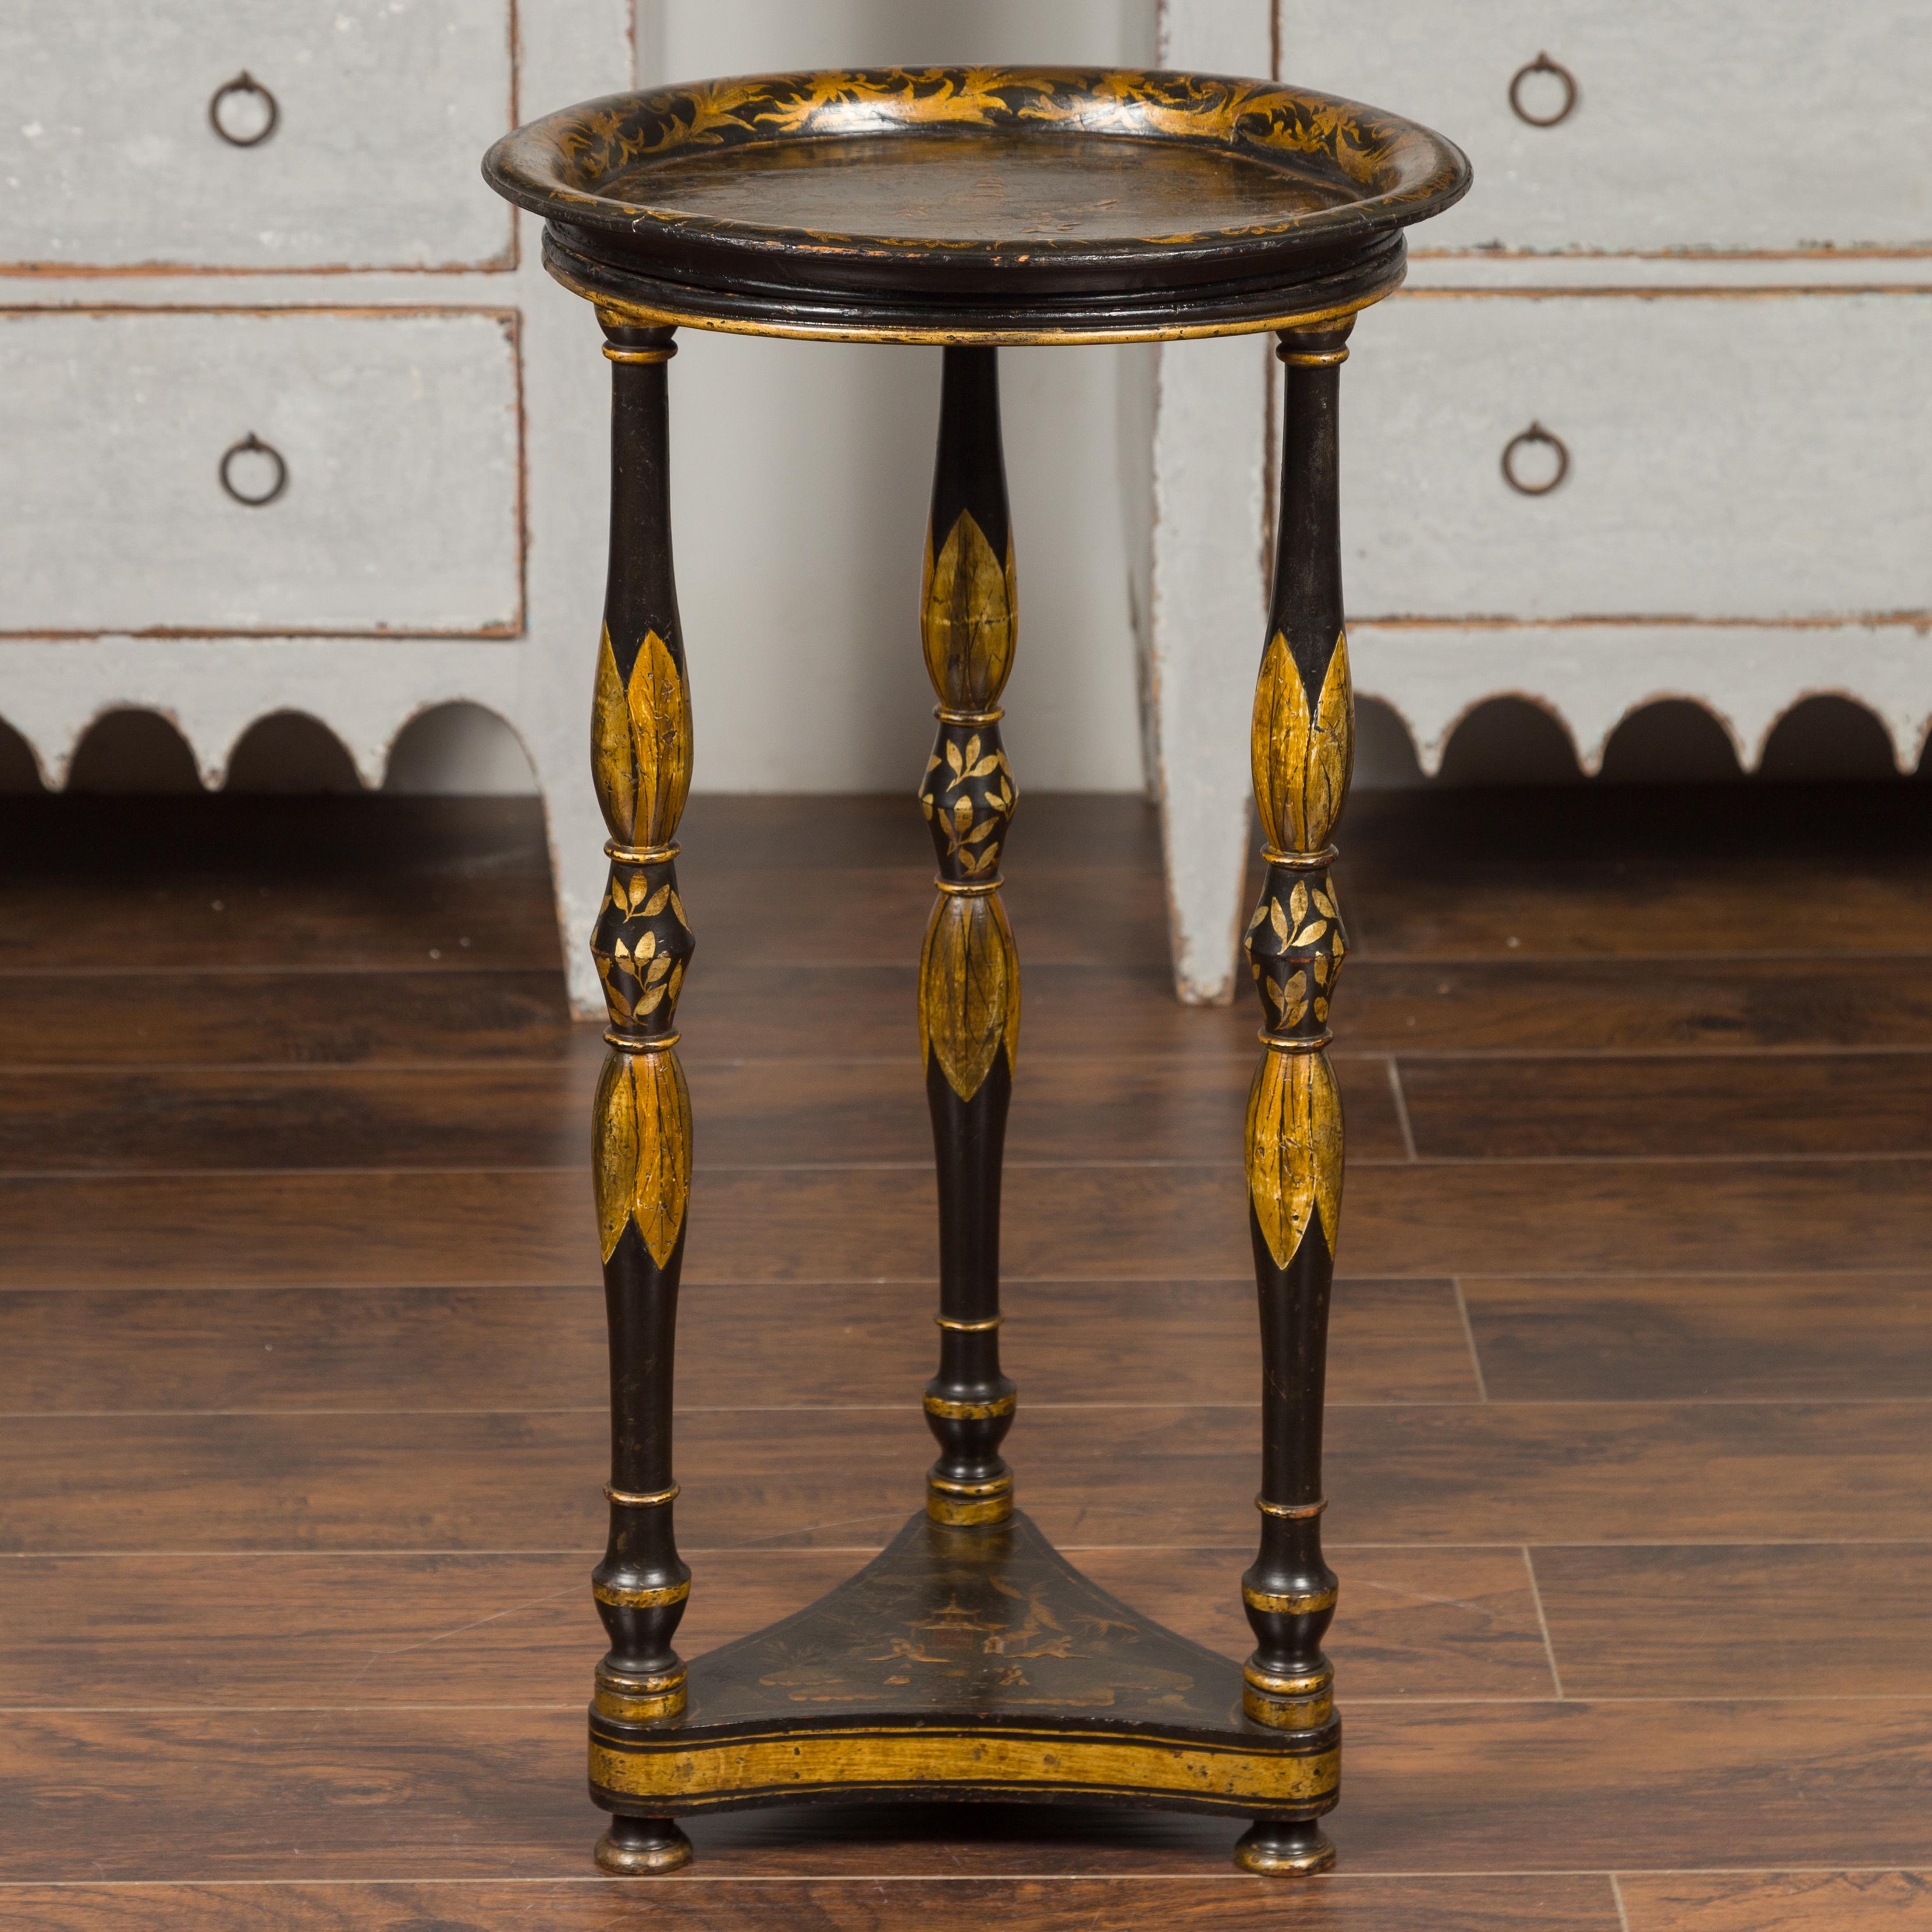 An English chinoiserie guéridon table from the mid-19th century, with traditional scenery, turned legs and lower shelf. Born in England during the 1850s, this guéridon table features a circular tray top resting on three delicately turned legs